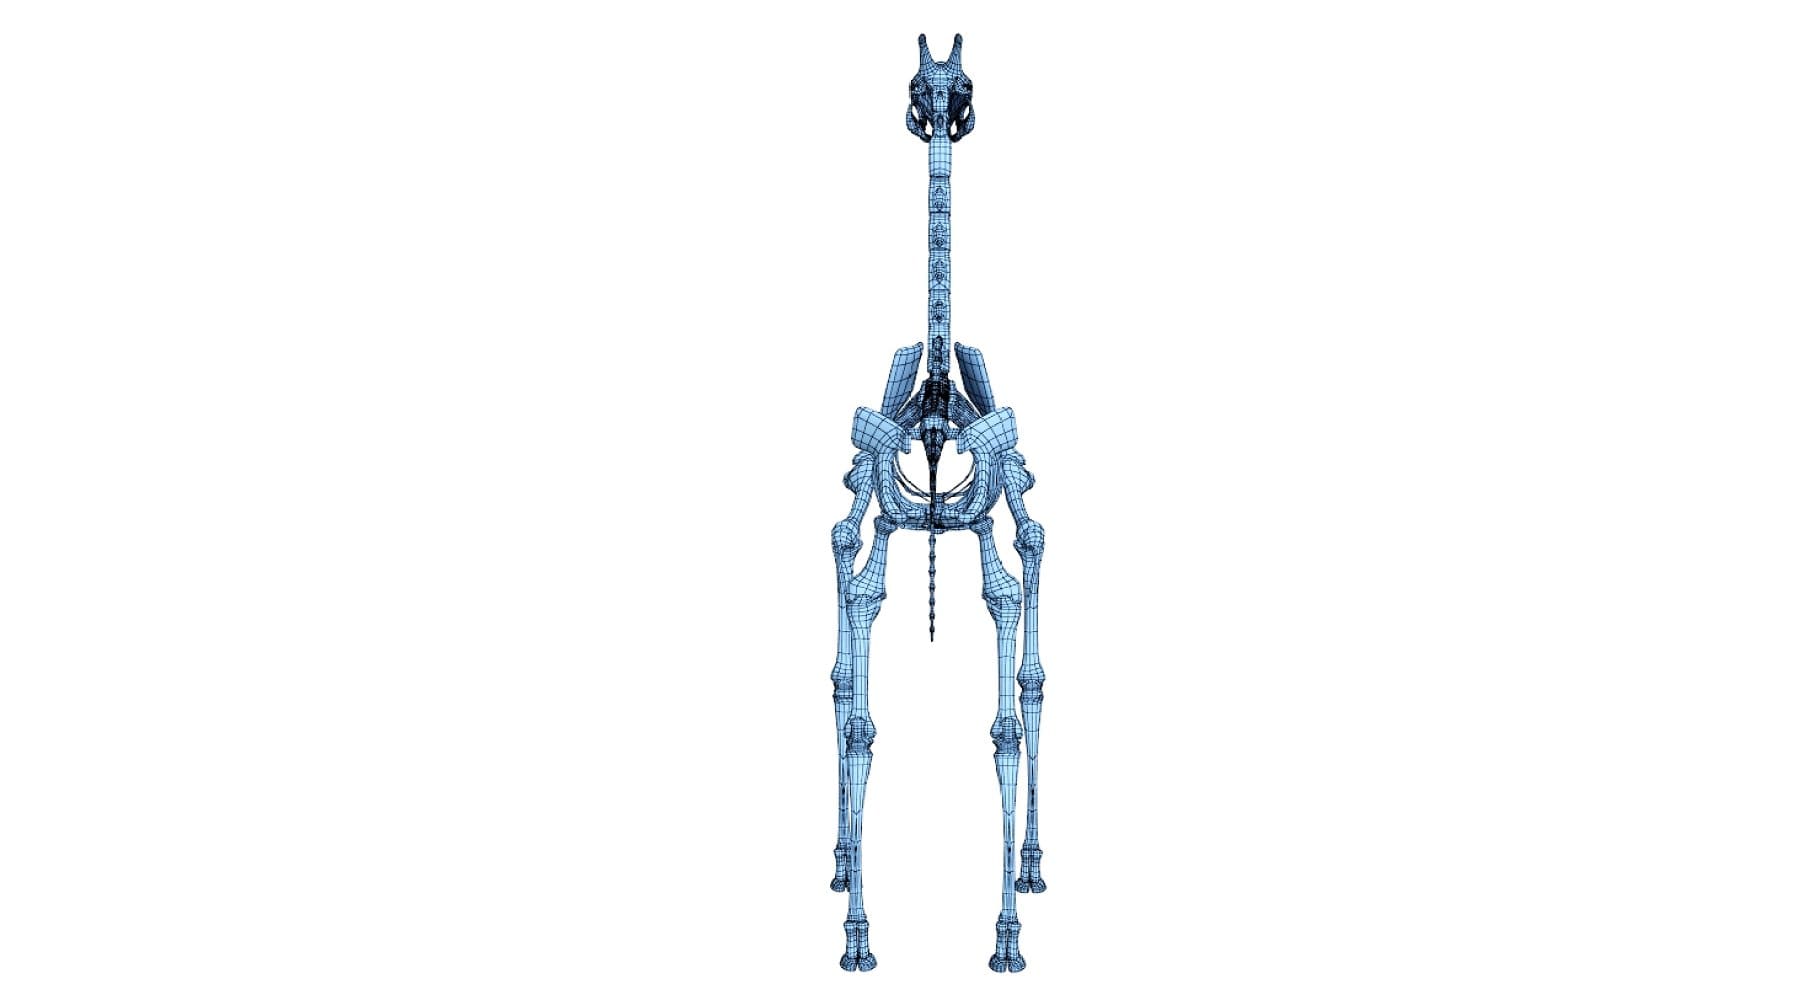 Image of a blue 3D model of a giraffe skeleton from the side of the skull.